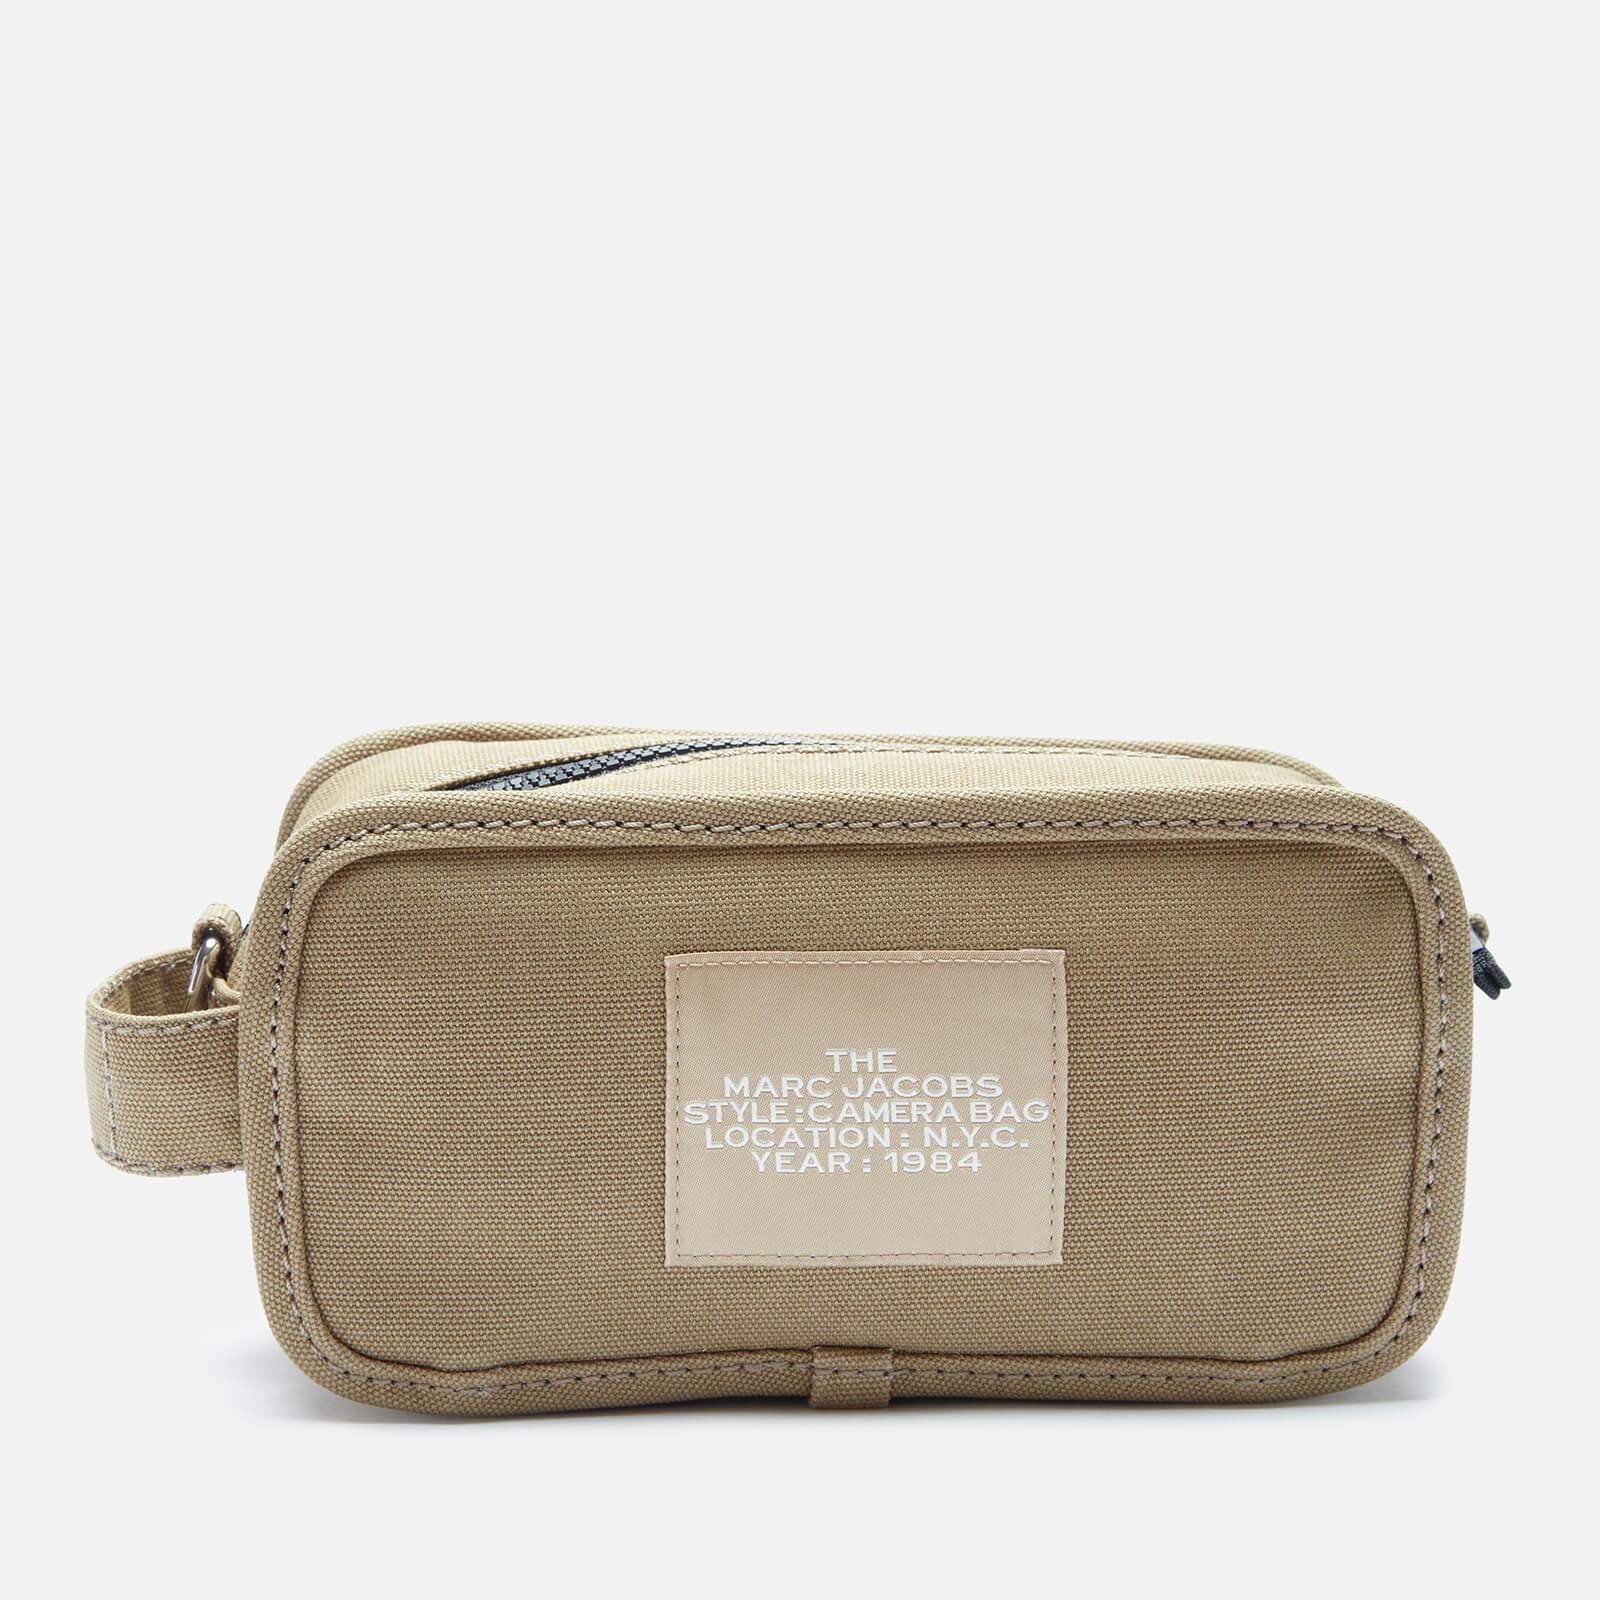 Marc Jacobs Canvas The Camera Bag in Green - Lyst